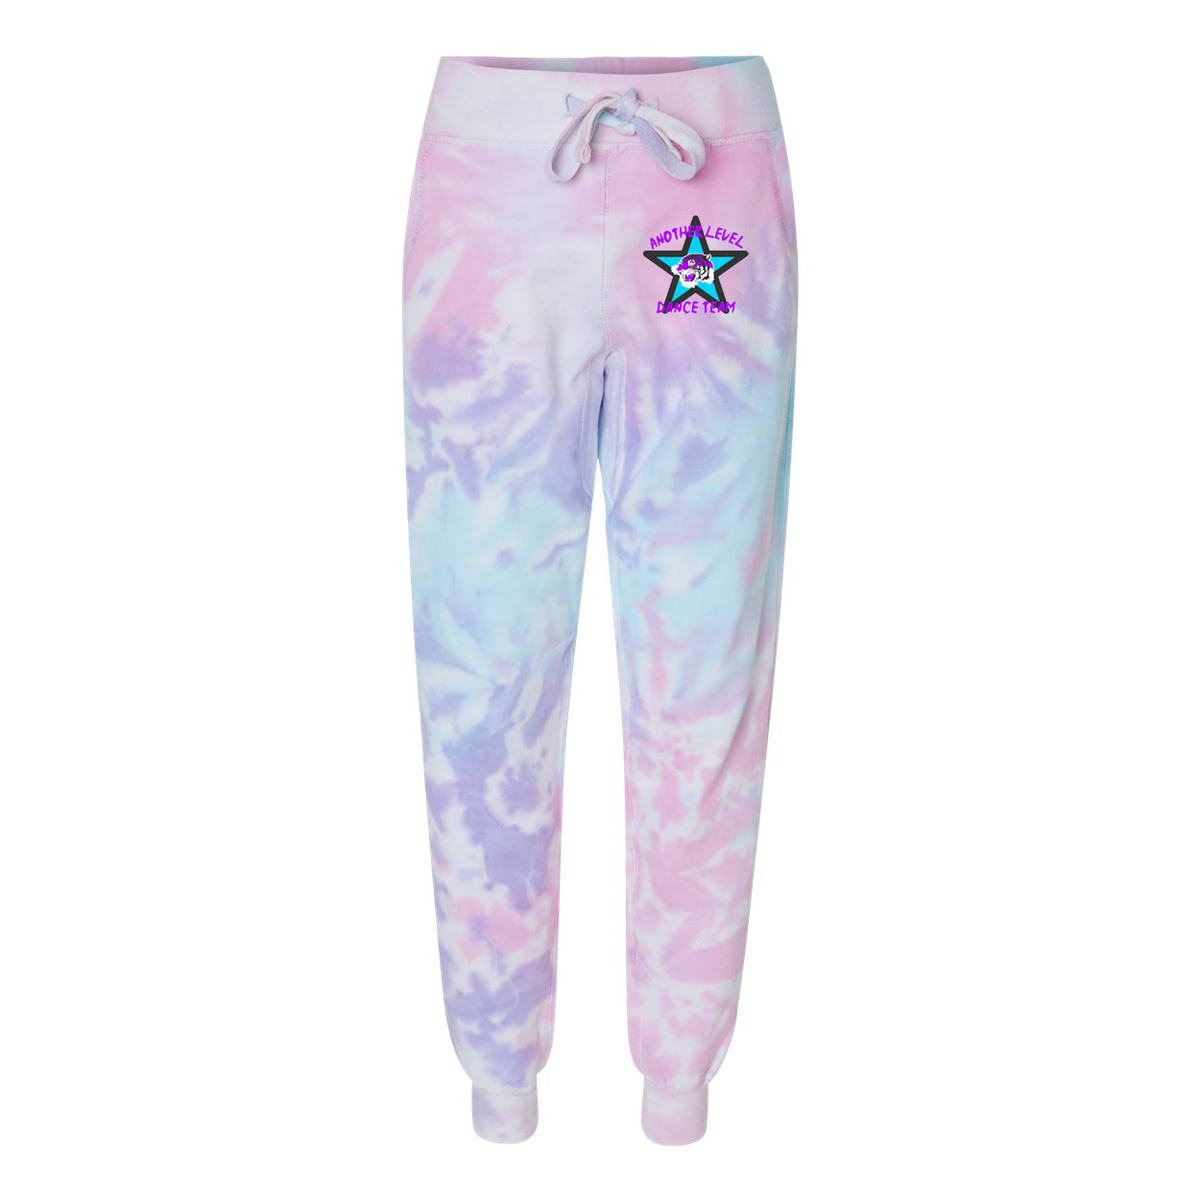 Another Level Dance Team Tie-Dyed Joggers